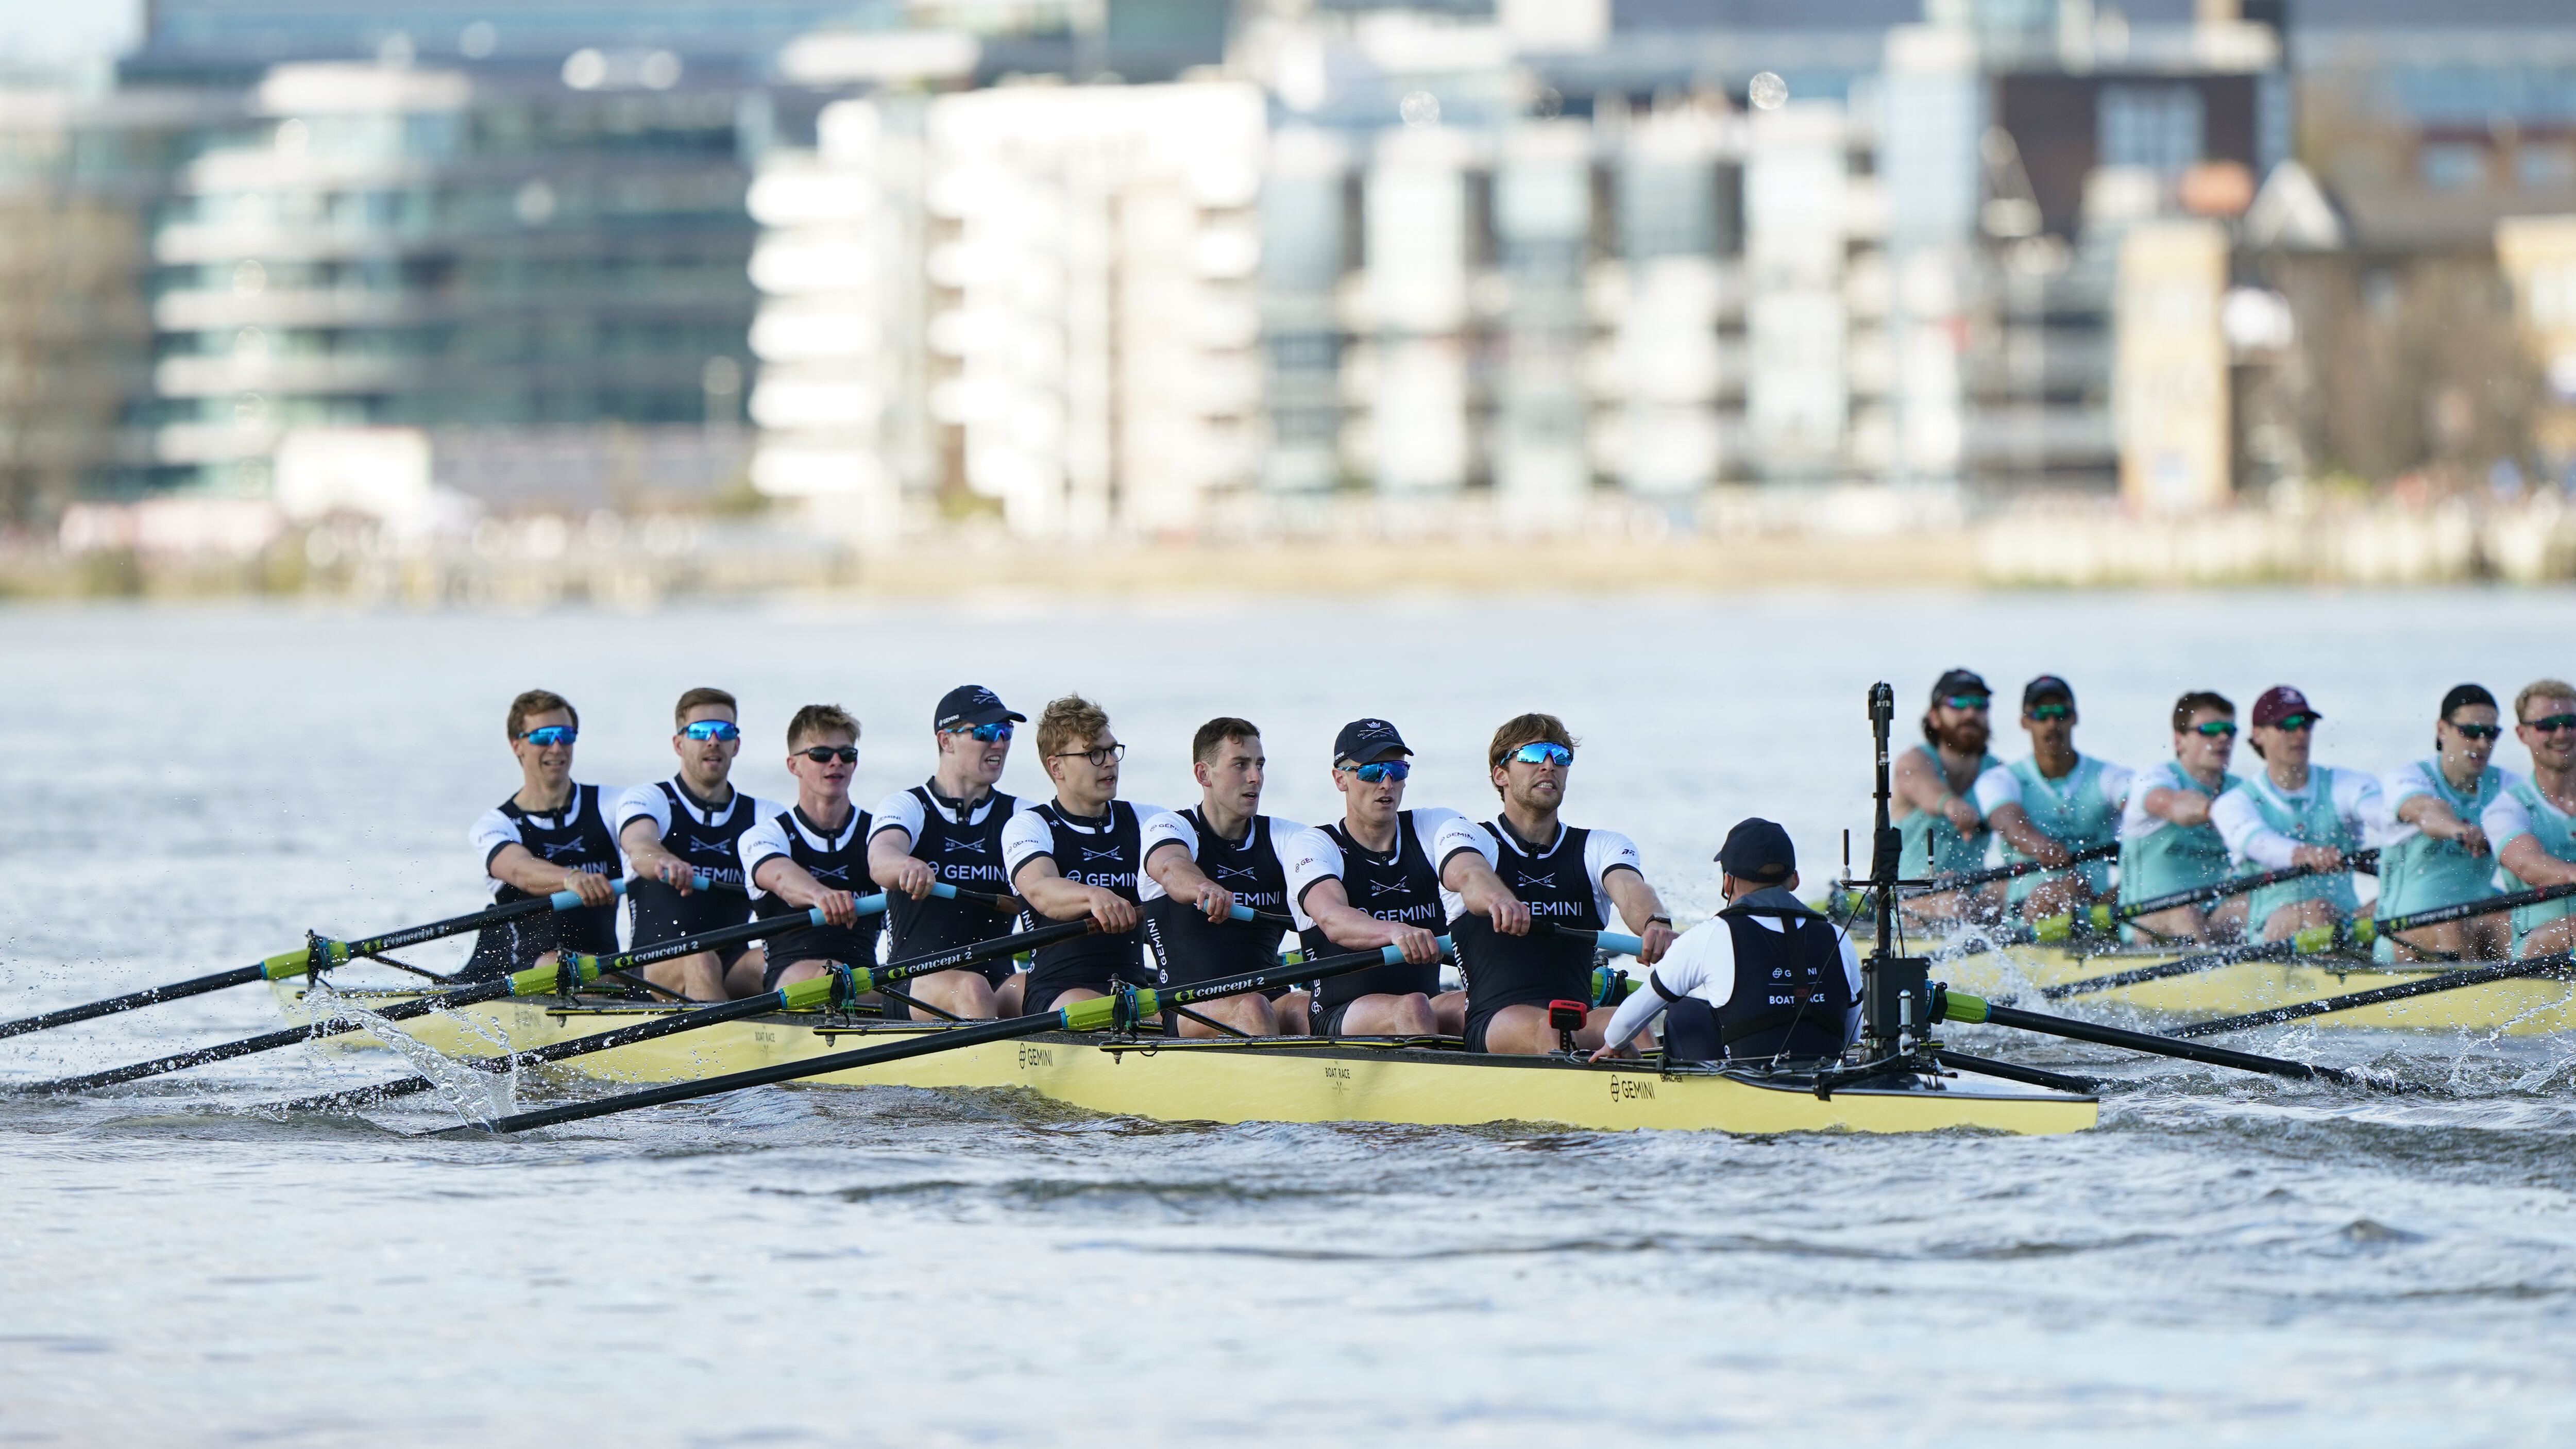 A rower on the Oxford team claimed sickness caused by E.coli played a part in its defeat